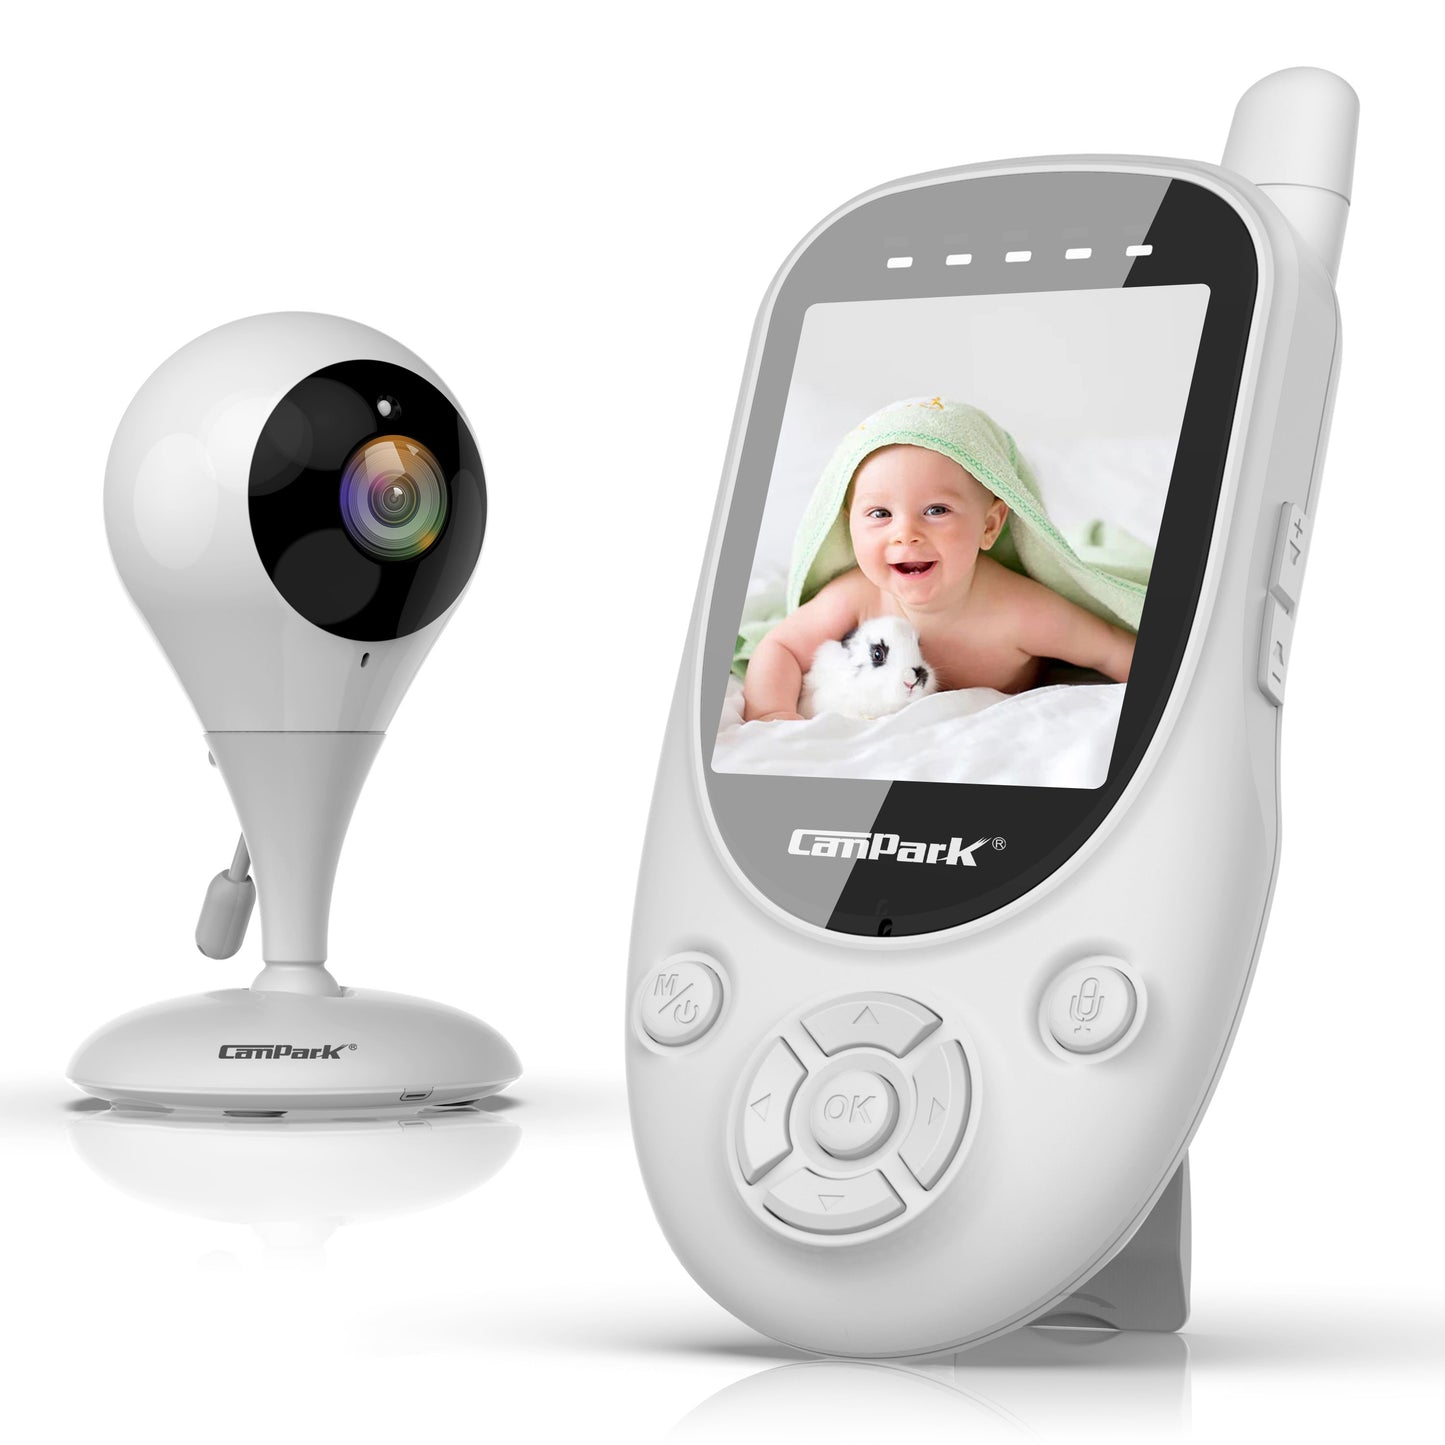 CAMPARK Video Baby Monitors with Camera, 2-Way Talk, Auto Night Vision, 2.4GHz Wireless Transmission, 960ft Range, Baby Camera, VOX Mode, Lullabies and Temperature Detection